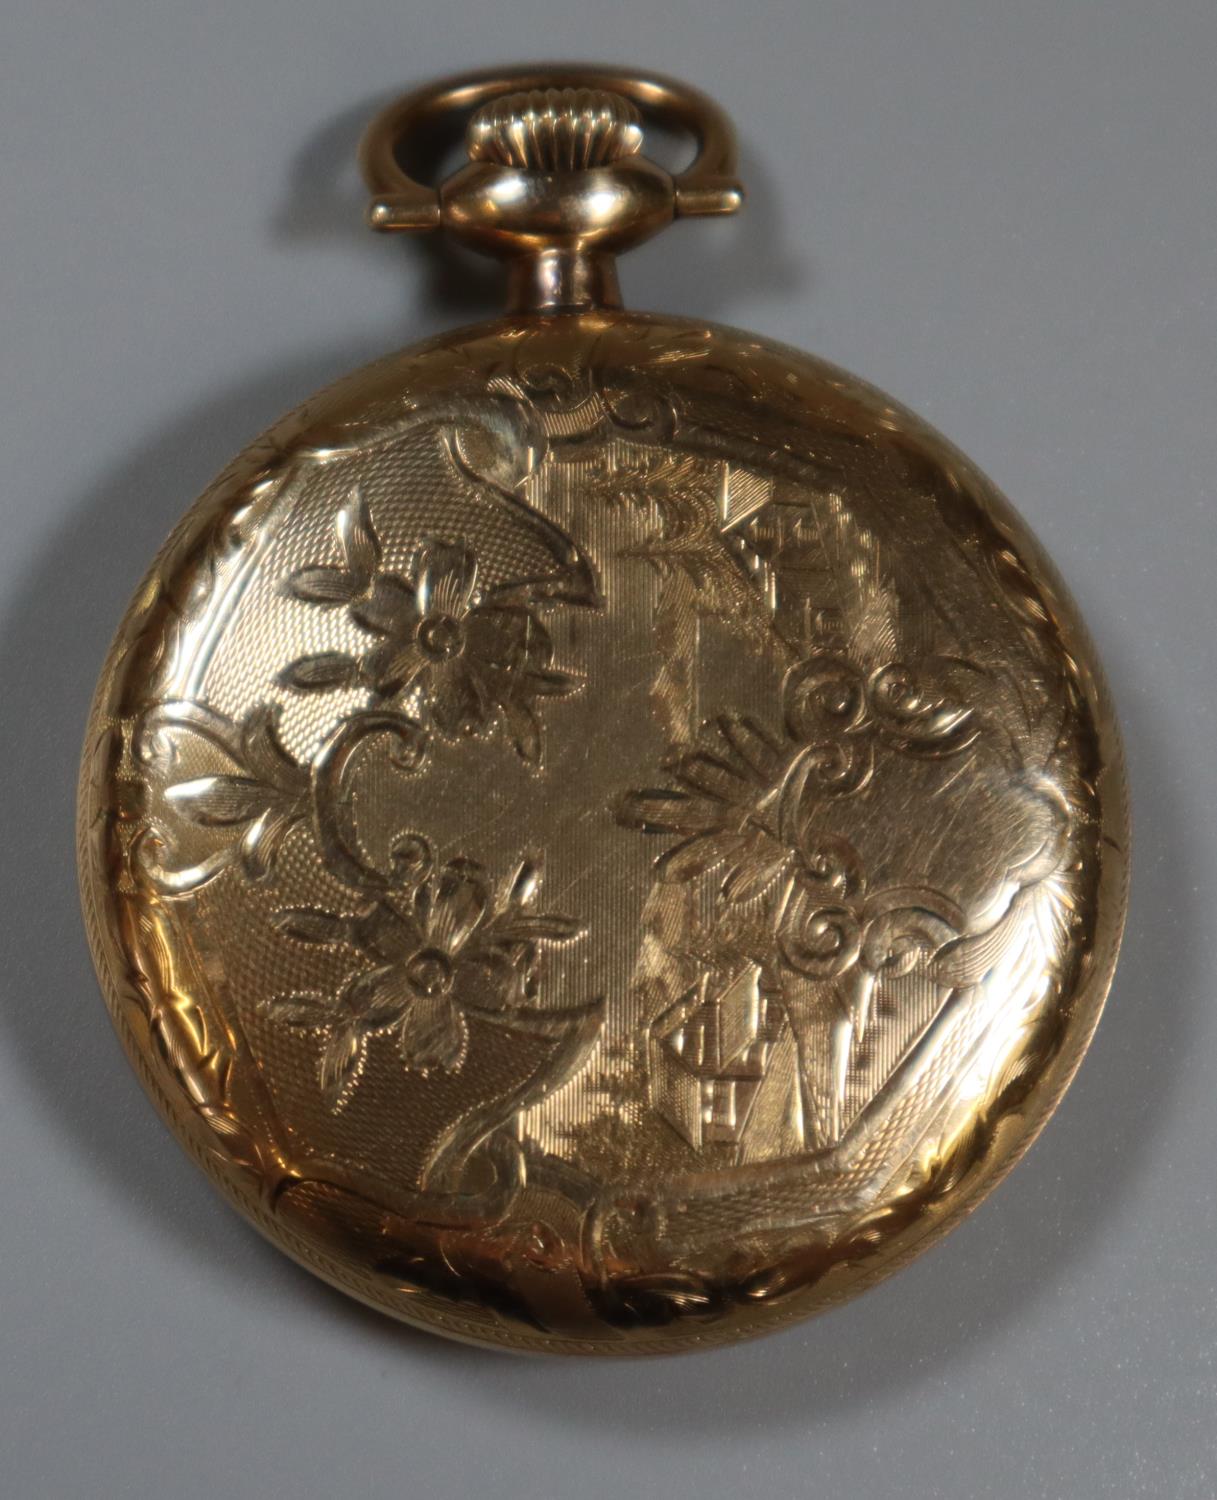 Elgin gold plated open faced pocket watch with enamel face and Roman numerals with engraved chased - Image 2 of 2